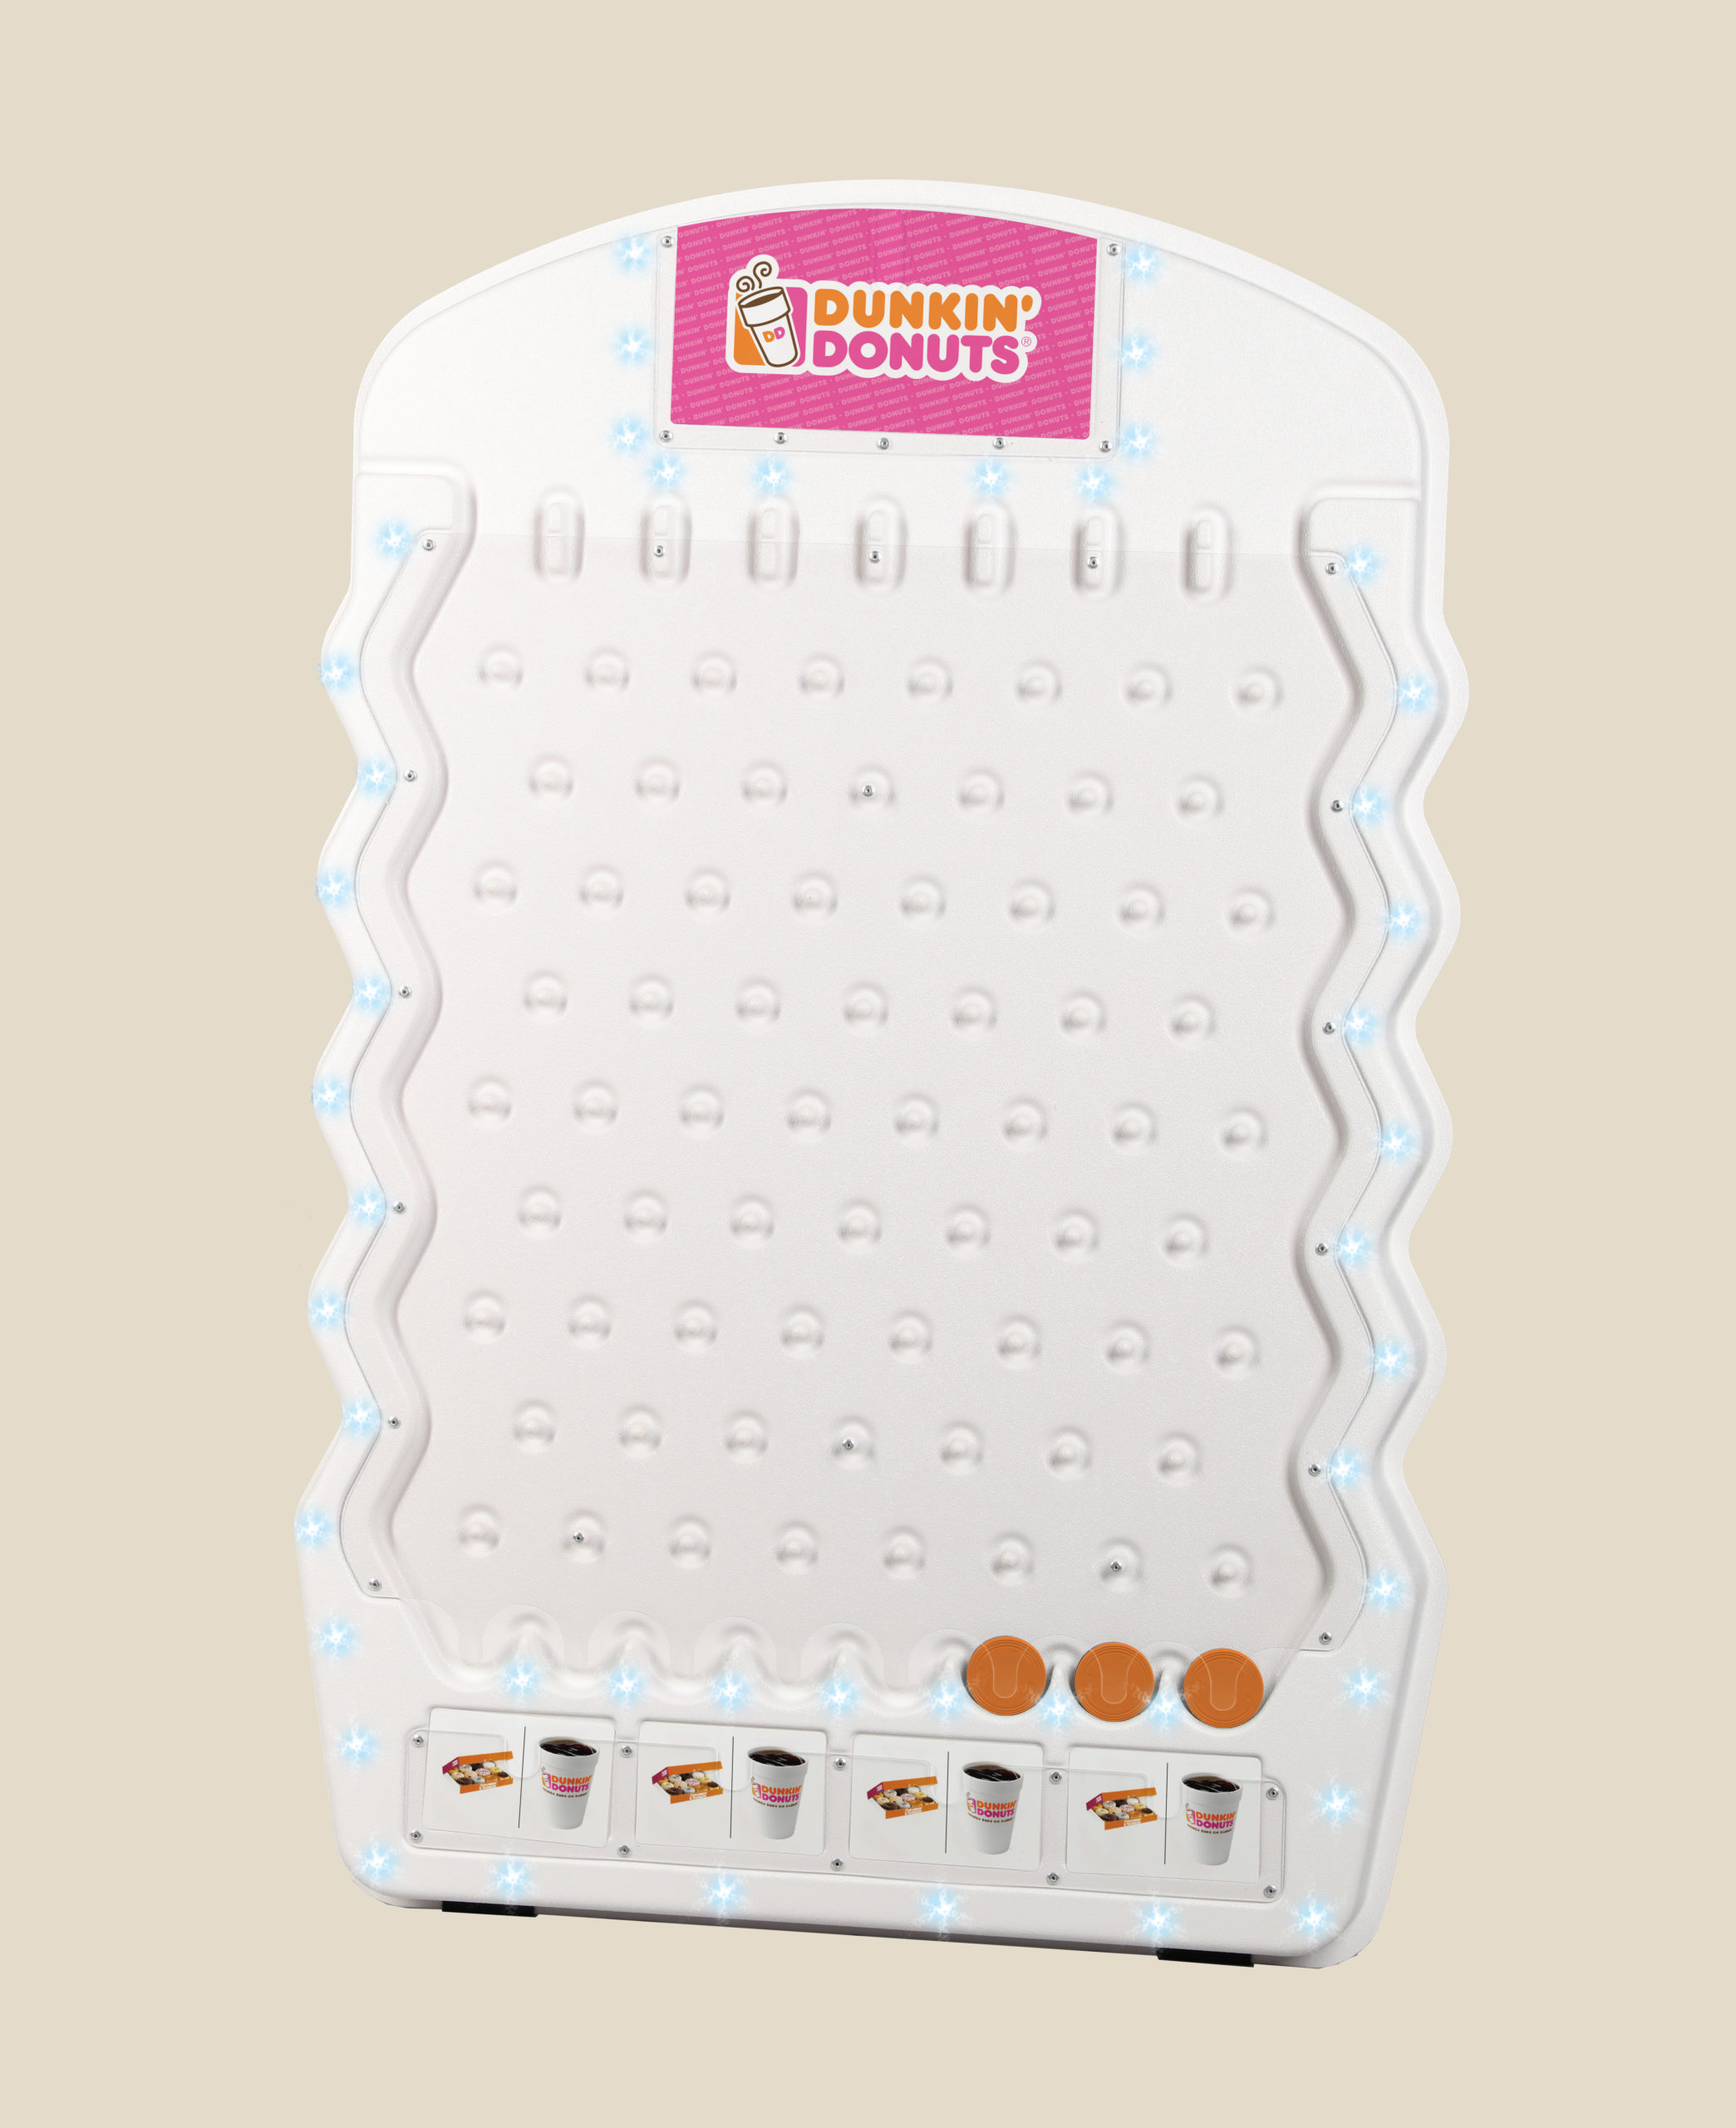 Mini White Plinko Game with LED Lights Introductory Price Limited Time Only! 